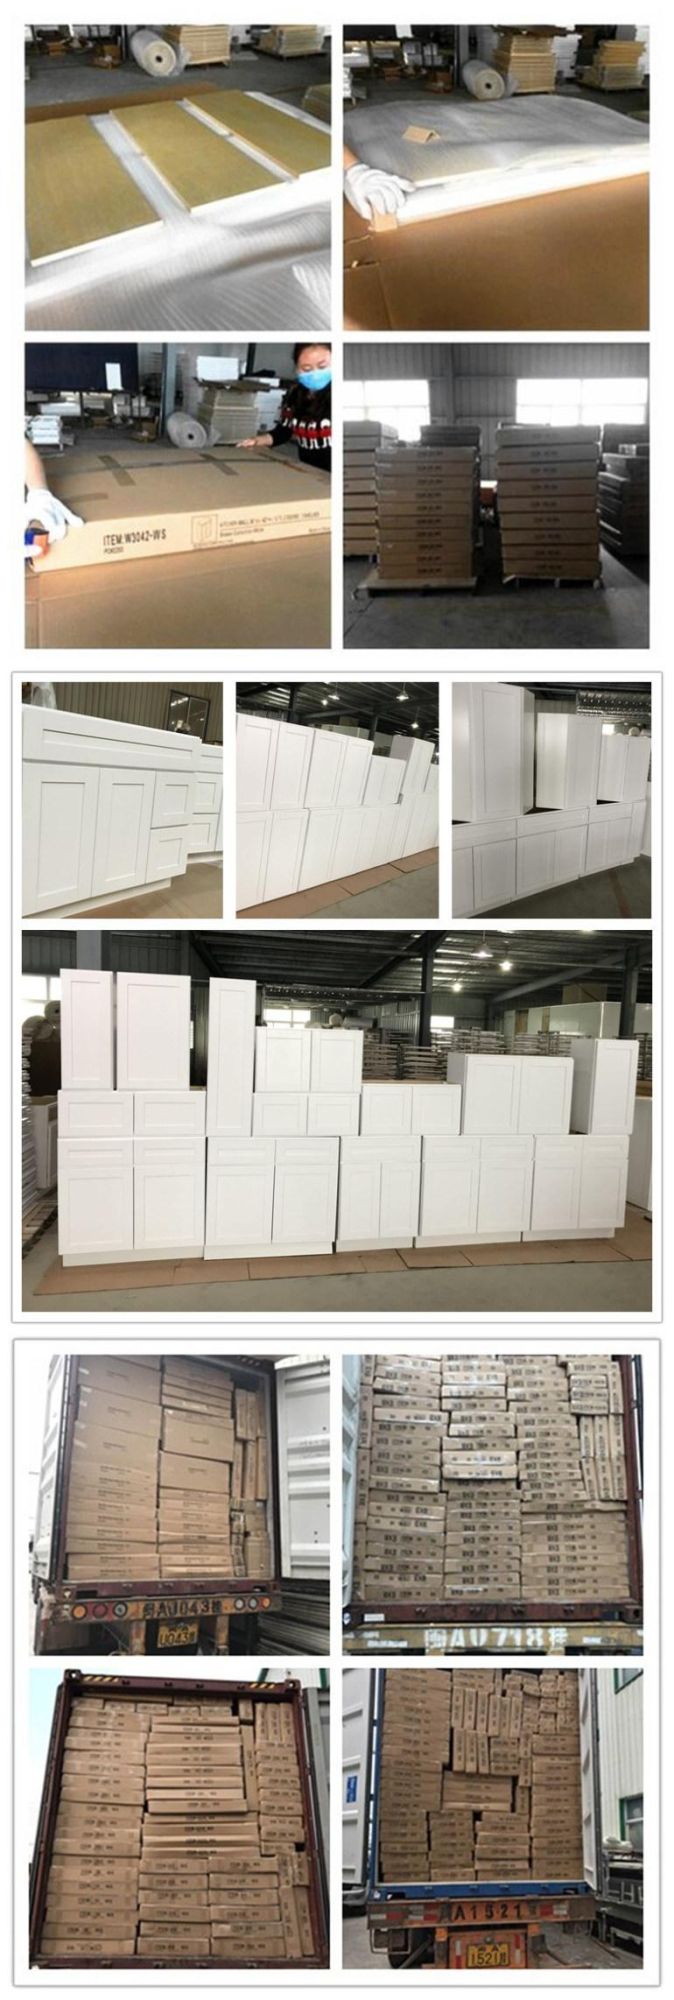 Hot Selling Modern Used Kitchen Cabinets, Kitchen Furniture Islands